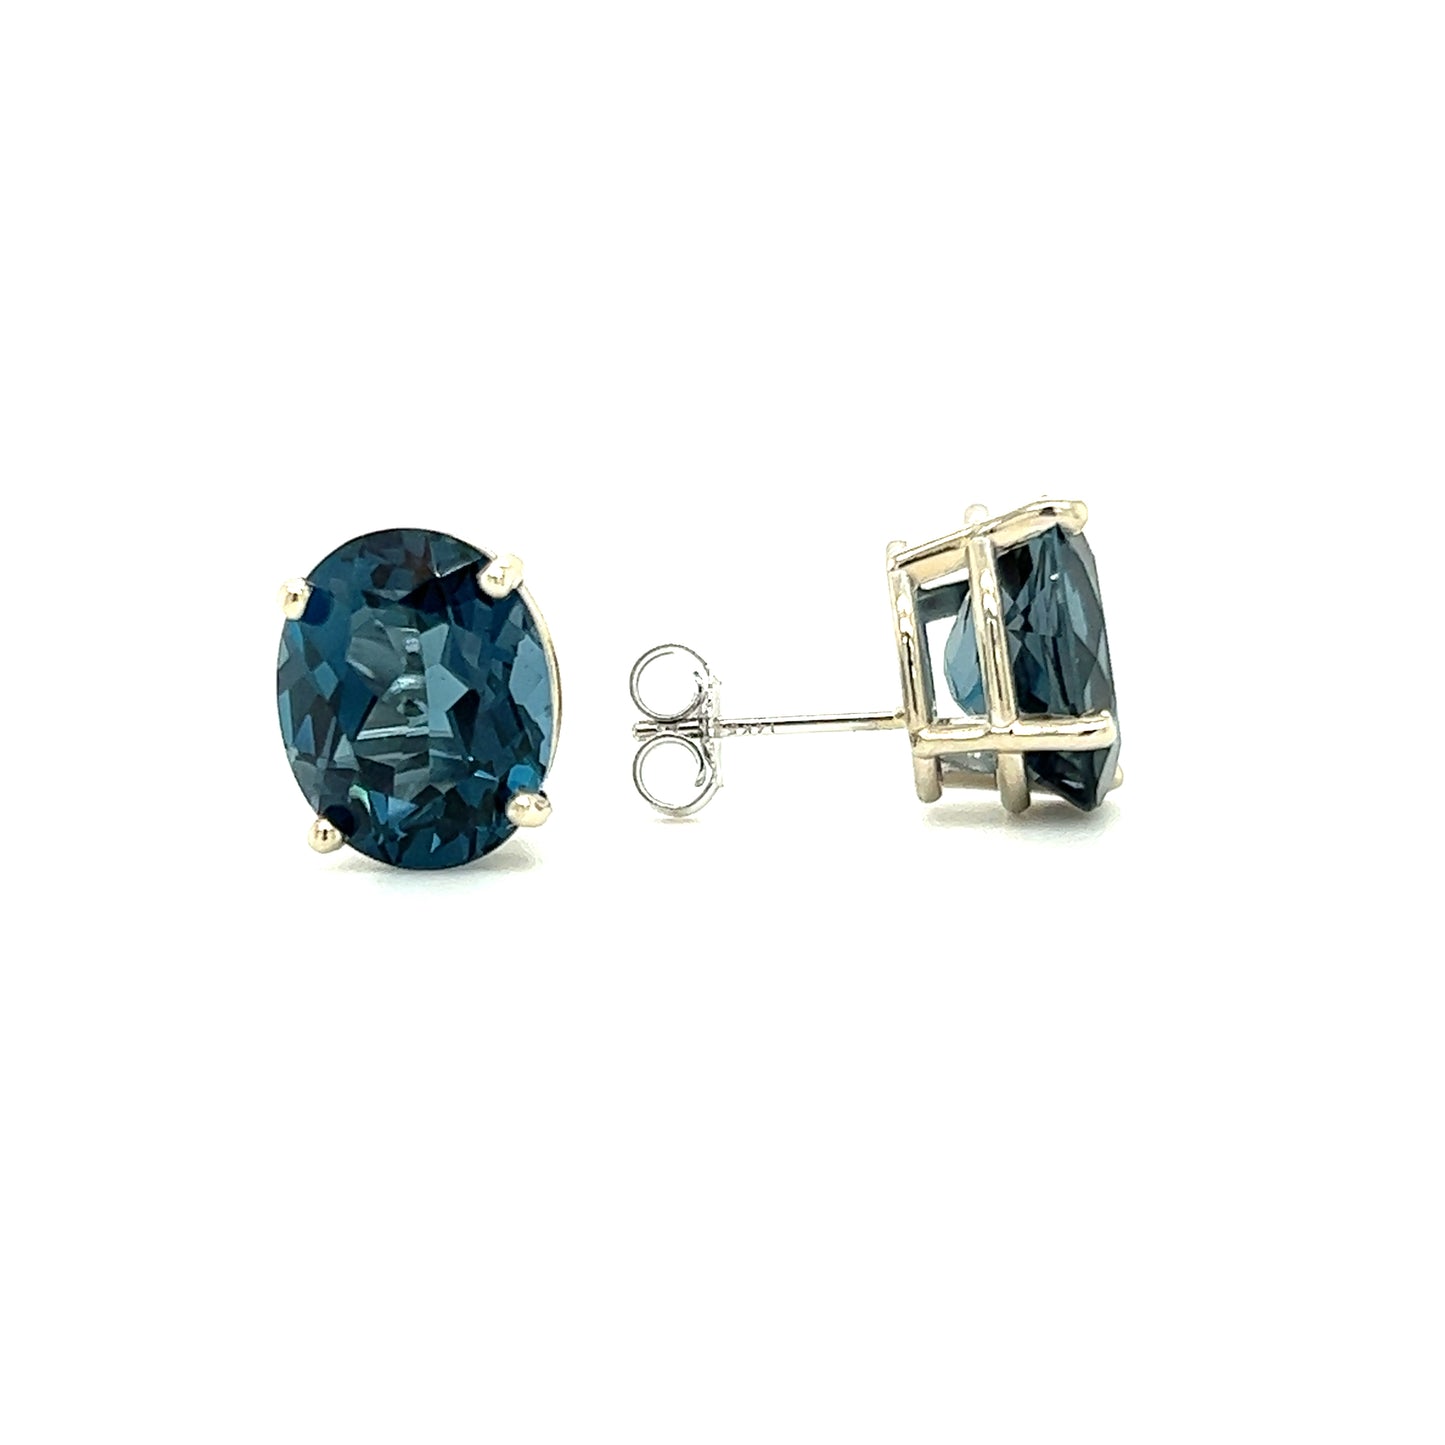 London Blue Topaz Stud Earrings in 14K White Gold Front and Side View